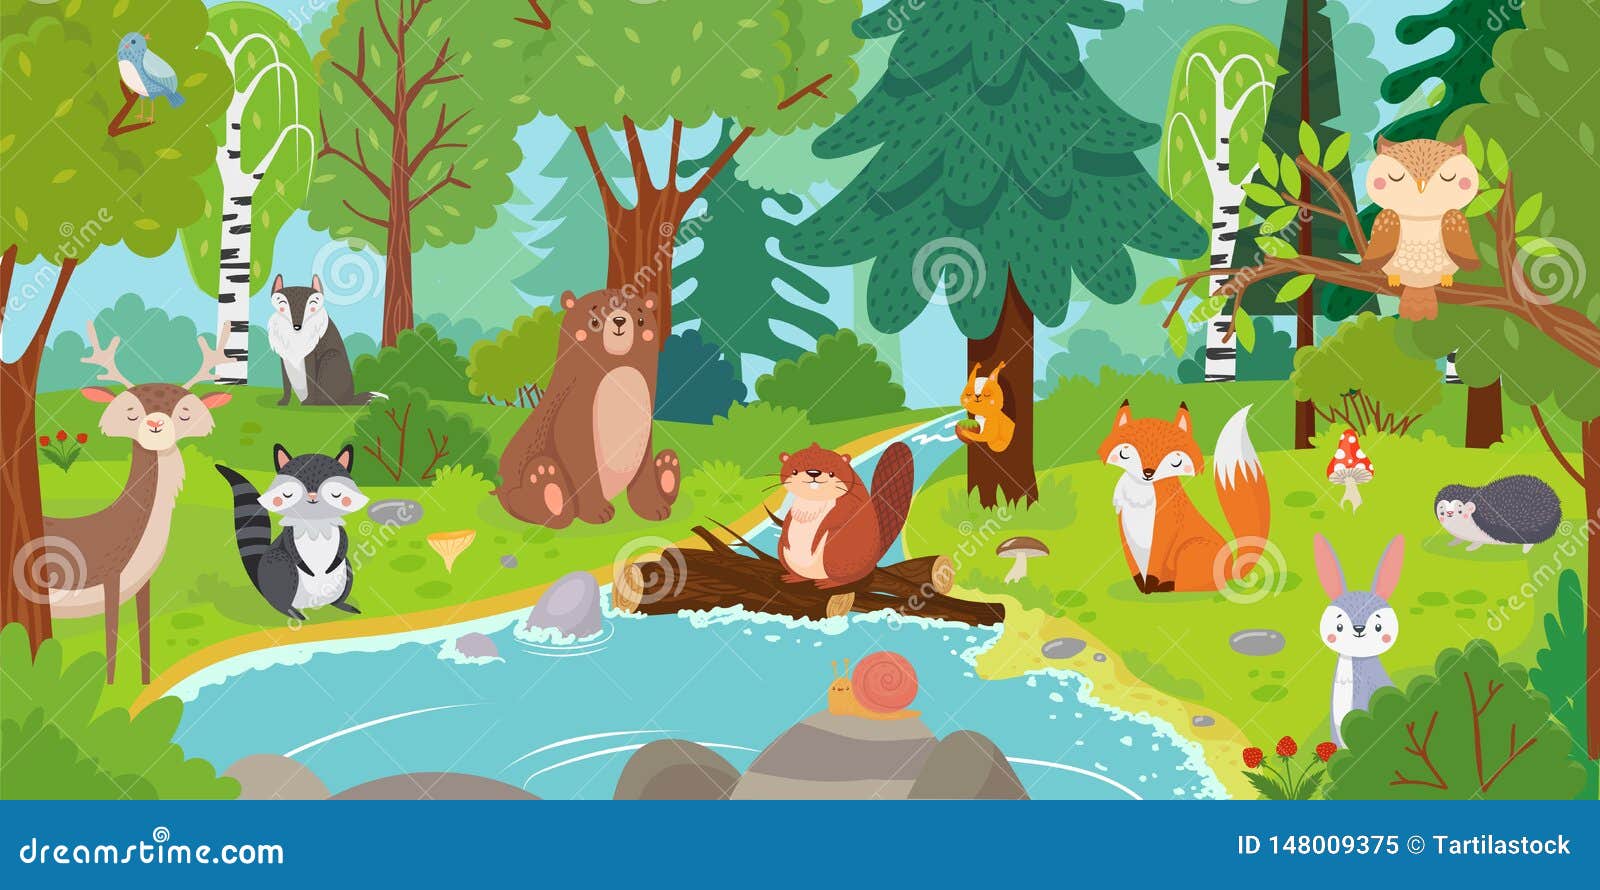 Cartoon Forest Animals Wild Bear Funny Squirrel And Cute Birds On Forests Trees Kids Vector Background Illustration Stock Vector Illustration Of Mushrooms Fawn